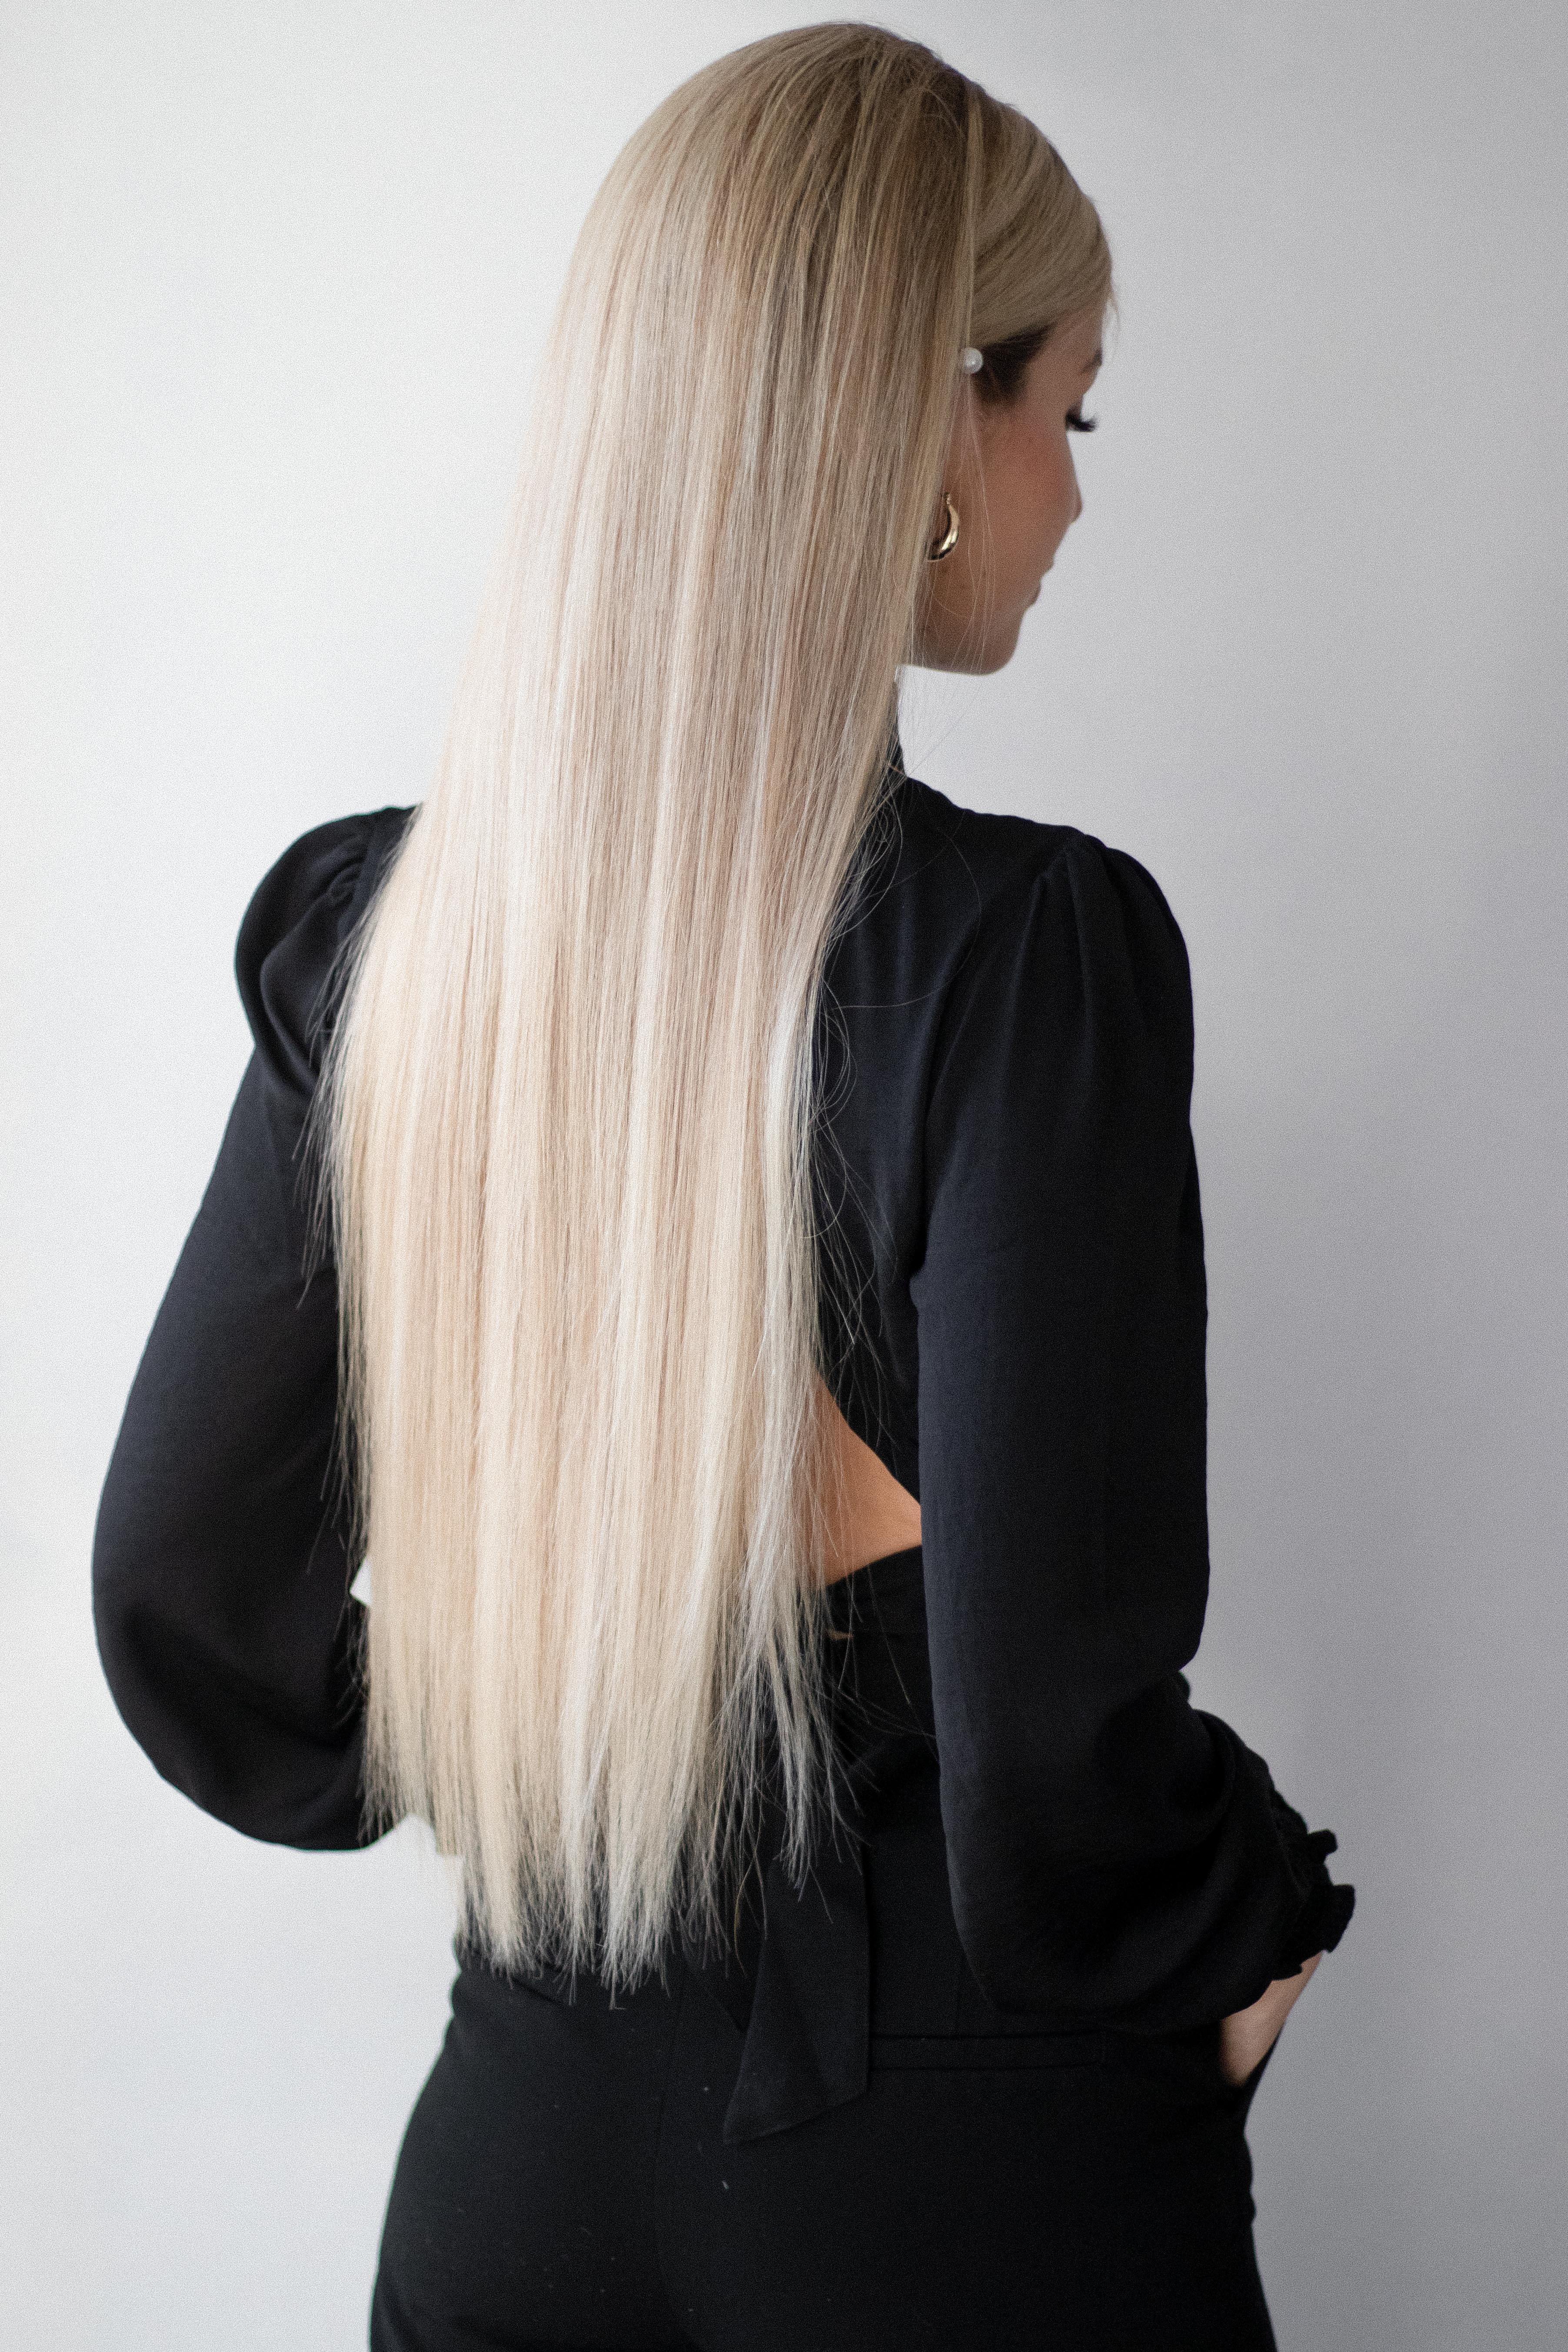 3 EASY AND QUICK HOLIDAY HAIRSTYLES | www.alexgaboury.com